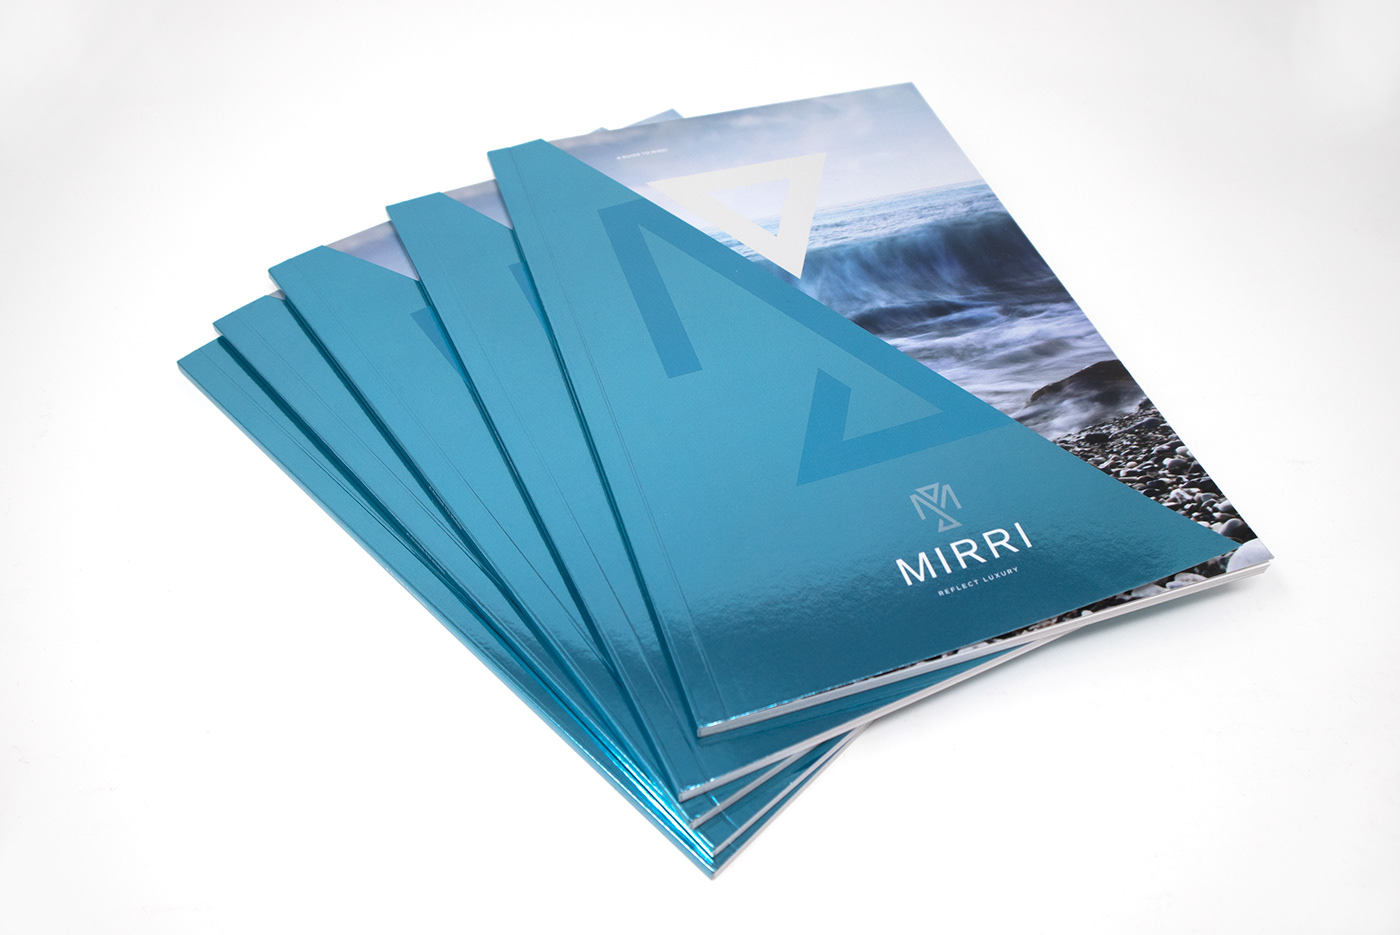 A guide to Mirri on Behance